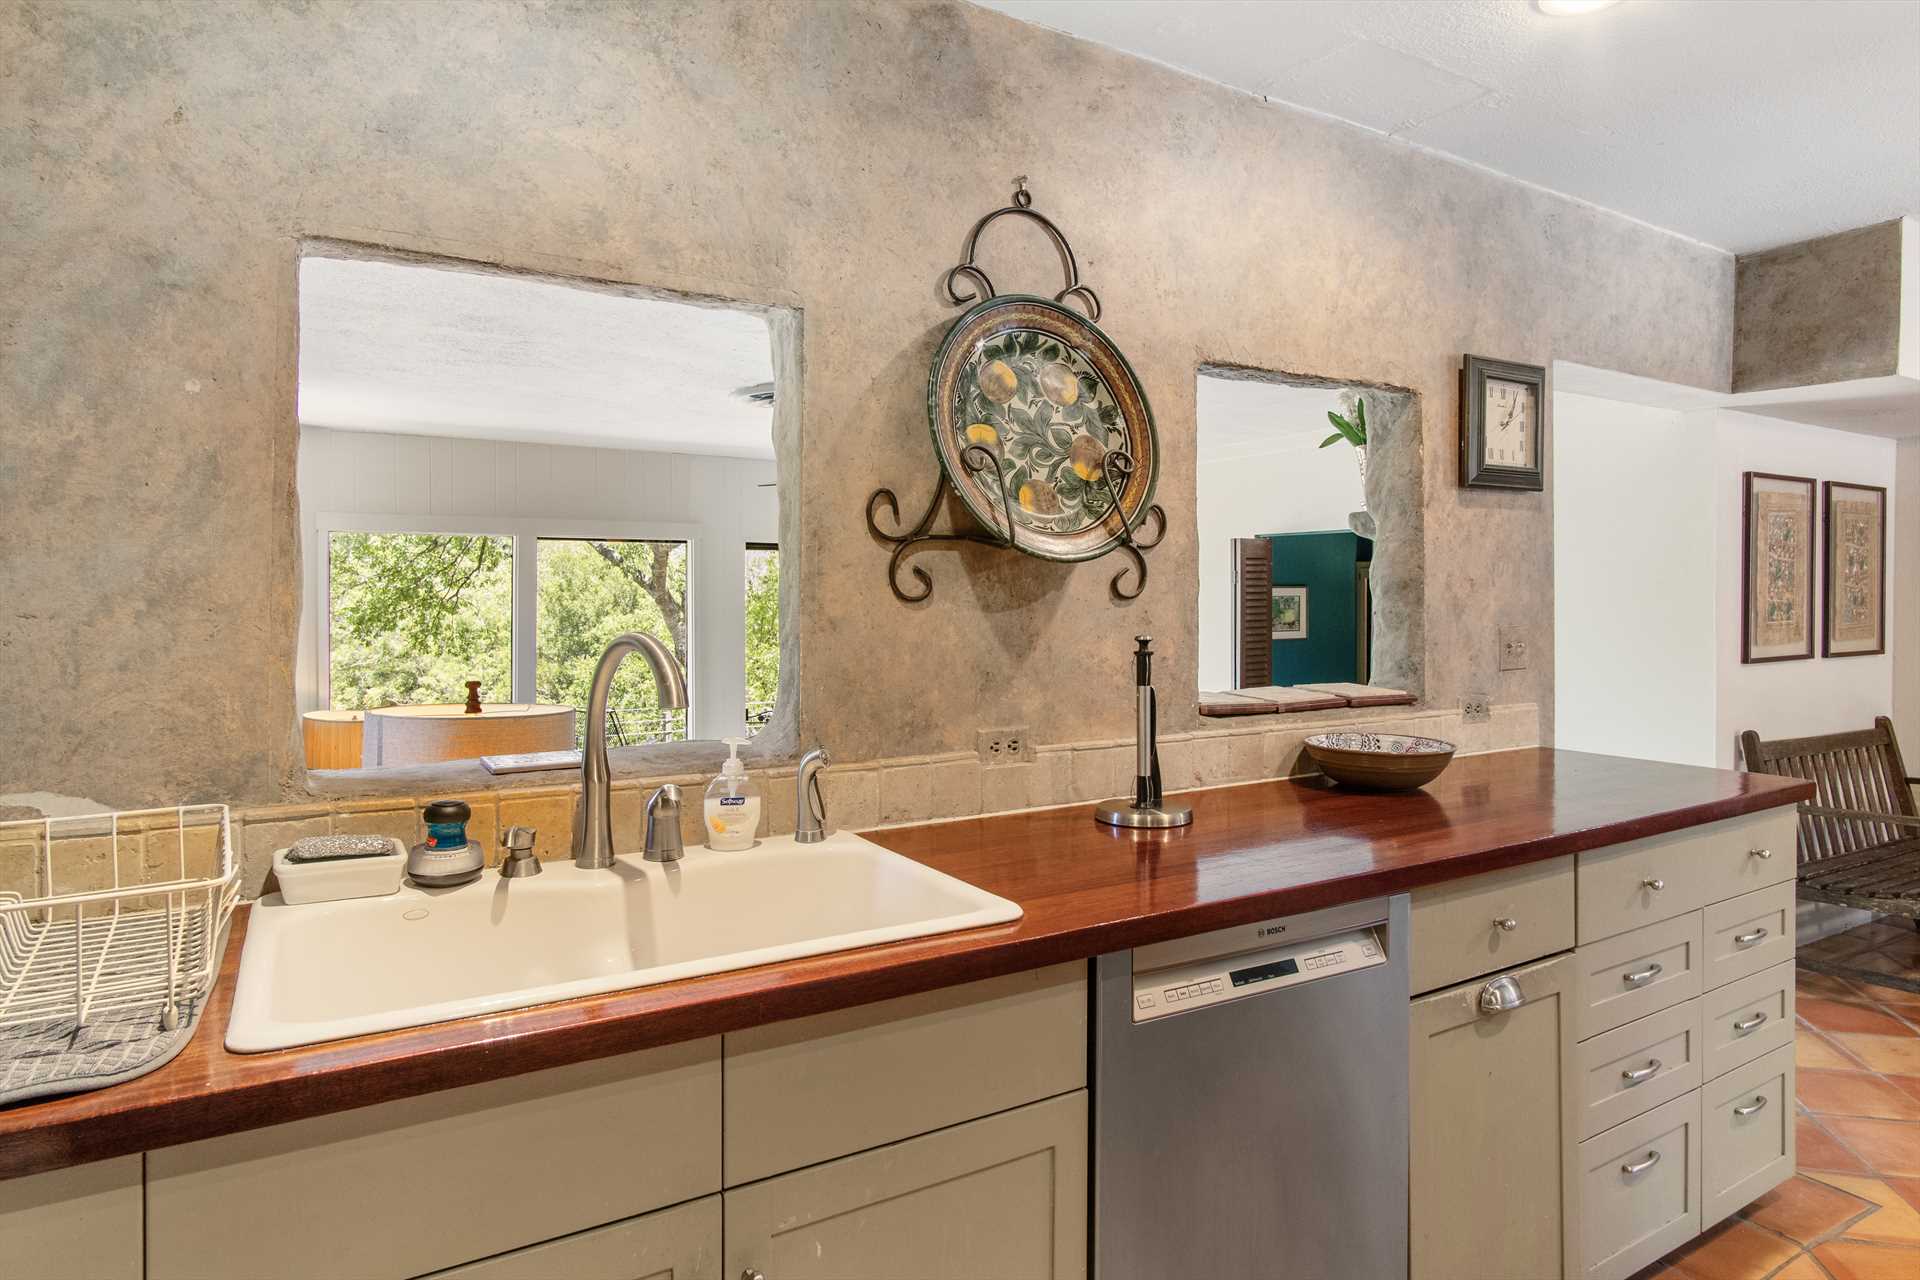                                                 A great big partitioned sink and plenty of counter space assure no one is crowded during meal prep!